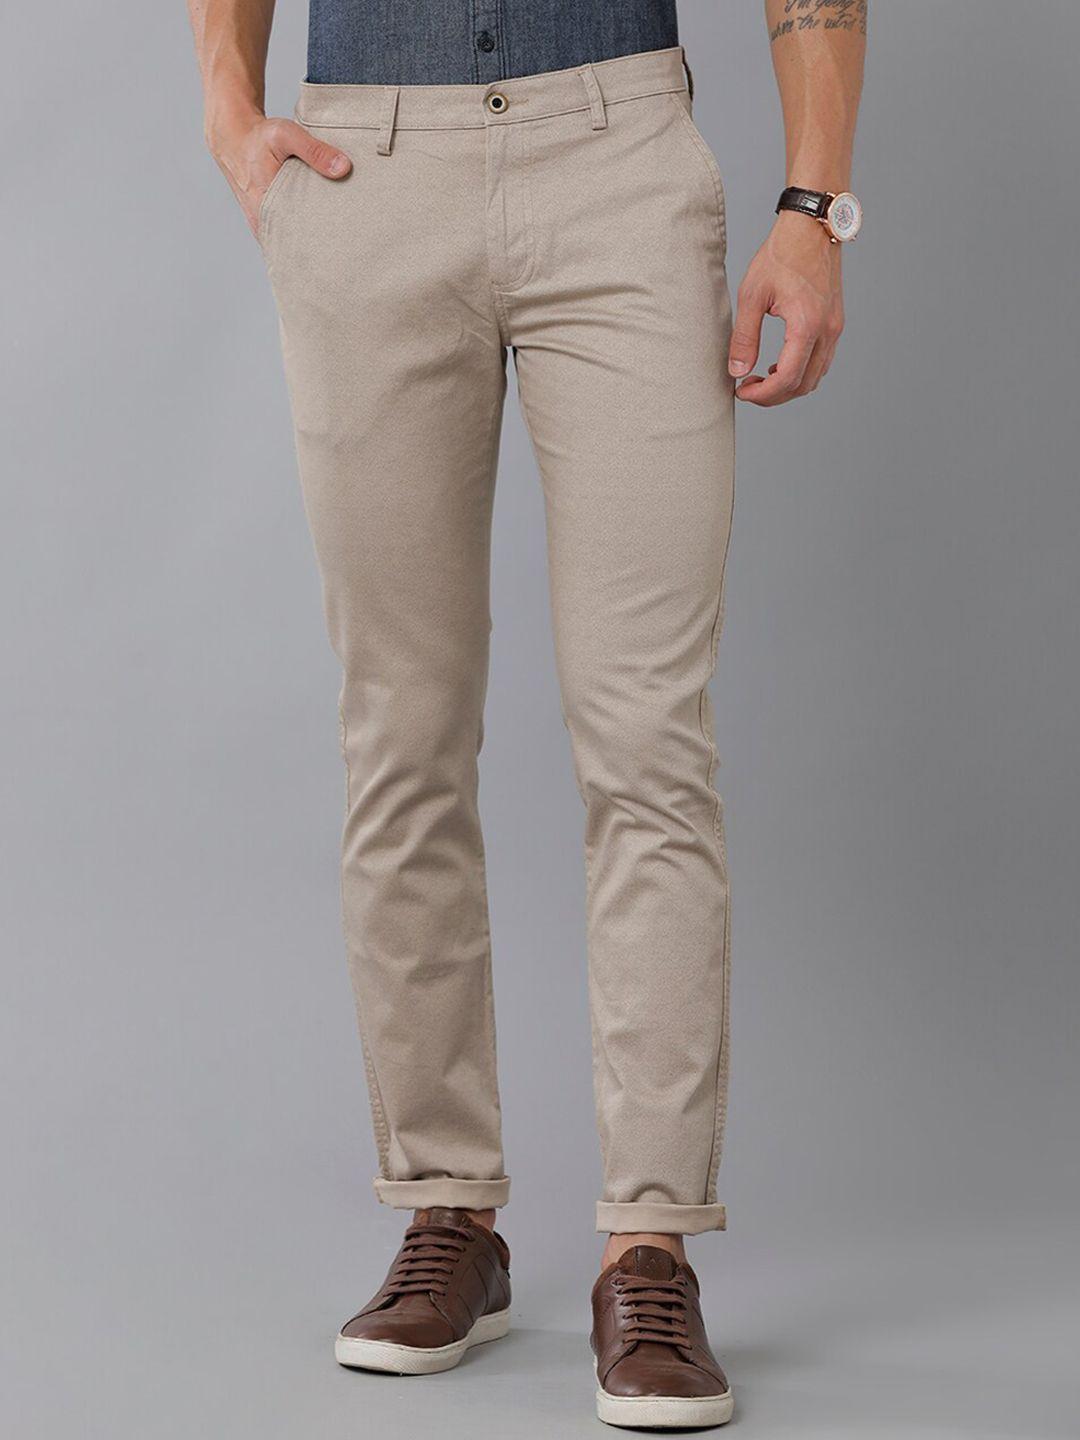 classic polo men classic slim fit cotton chinos trousers